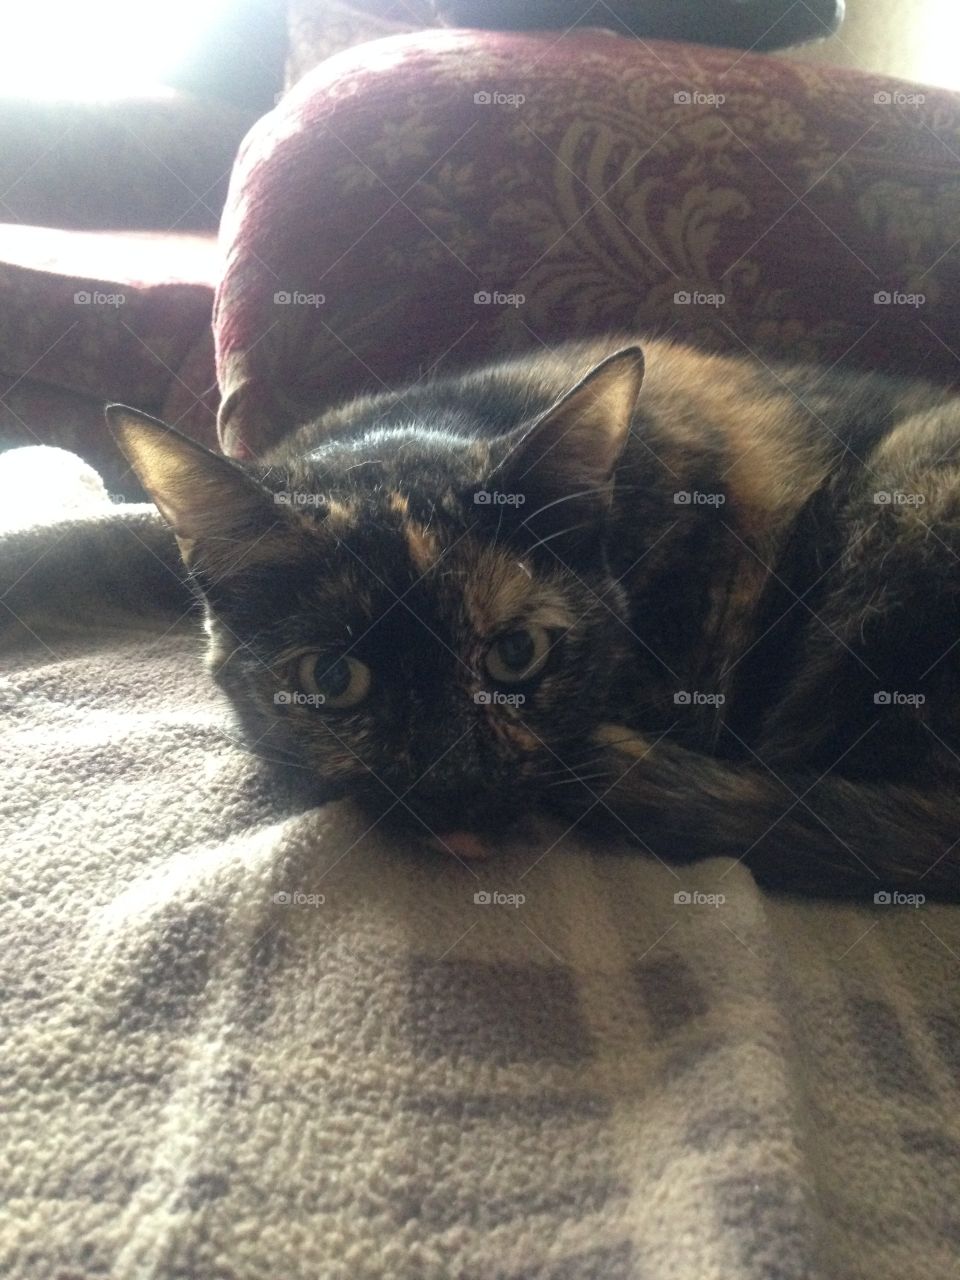 Caitlain, our tortoiseshell kitty, ready for a.nap on the couch